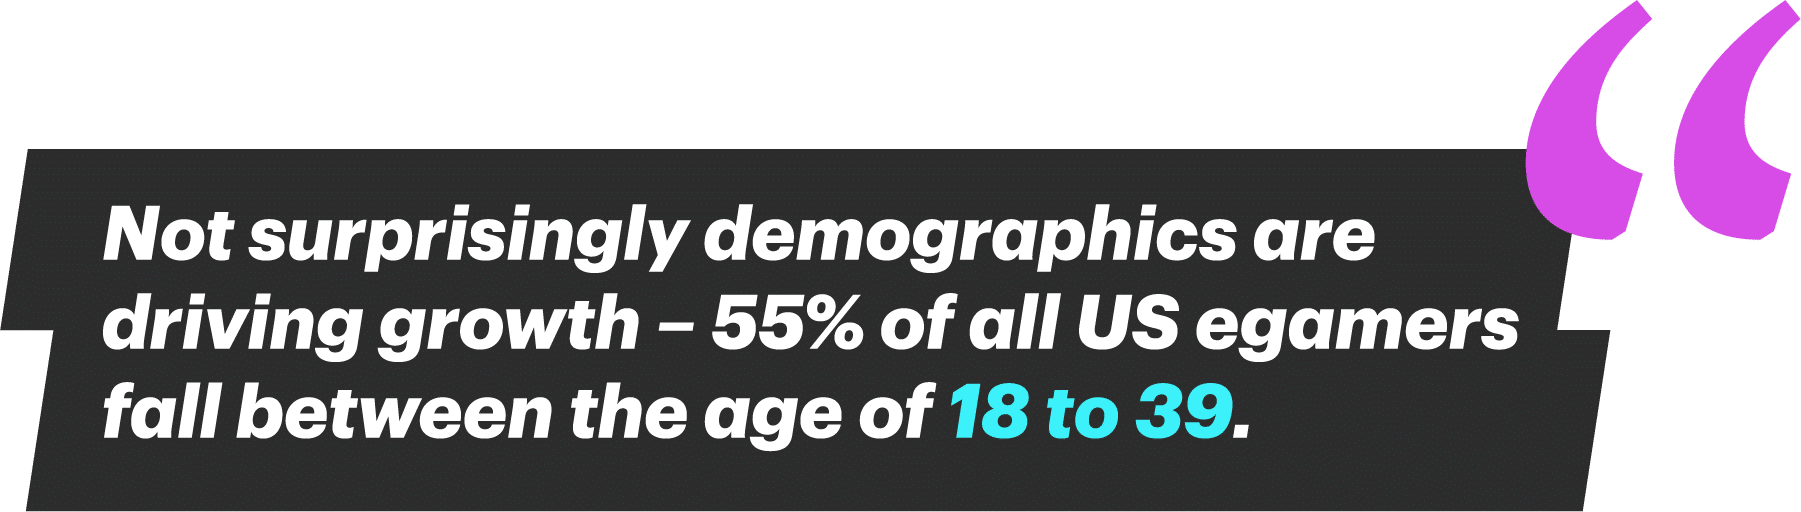 Not surprisingly demographics are driving growth - 55% of all US egamers fall between the age of 18 to 39.